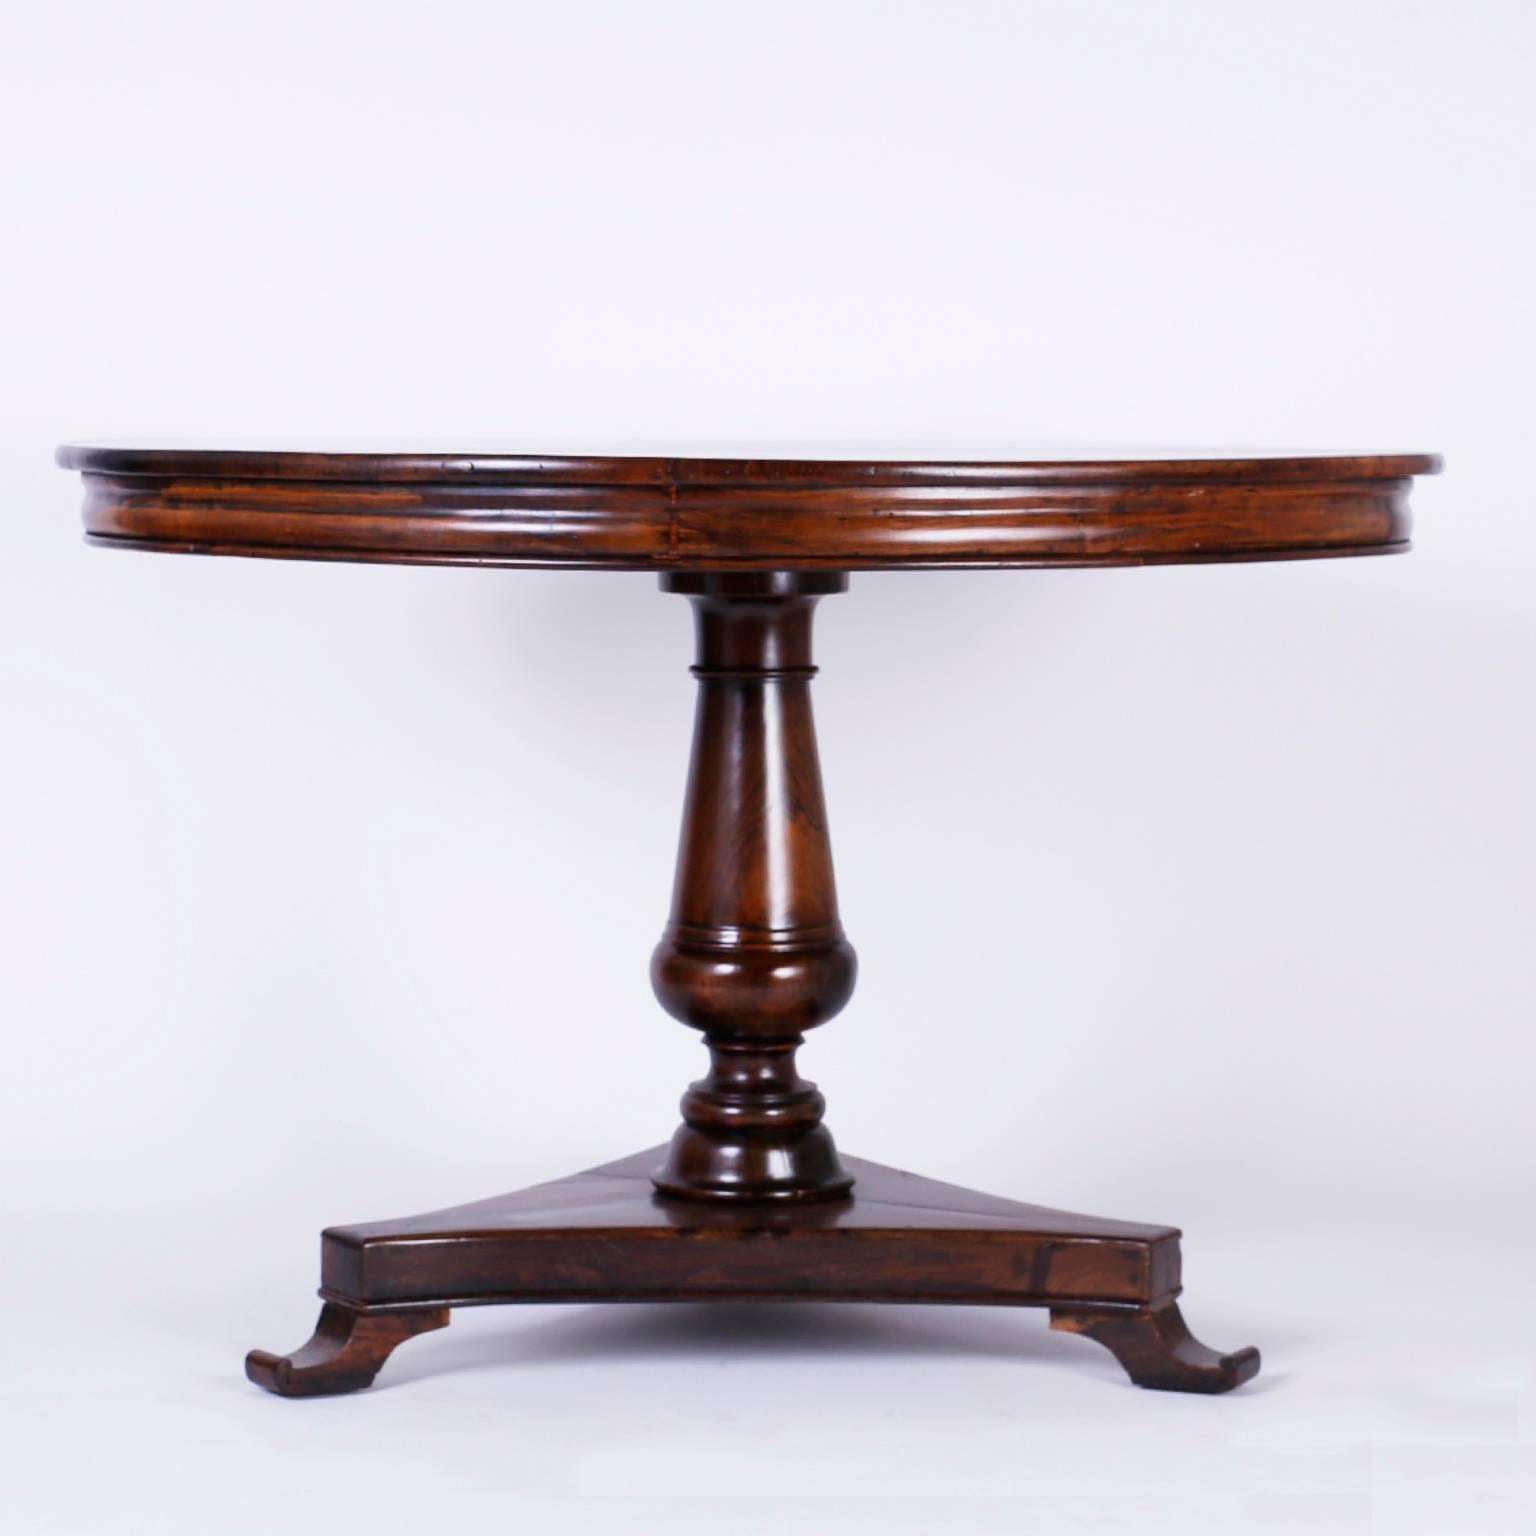 Antique Anglo-Indian dining table or center table crafted with an exotic cut of rosewood, featuring a classical sophisticated casual form with a round top, Bombay skirt, elegant turned pedestal, and a triangular base with sled feet.